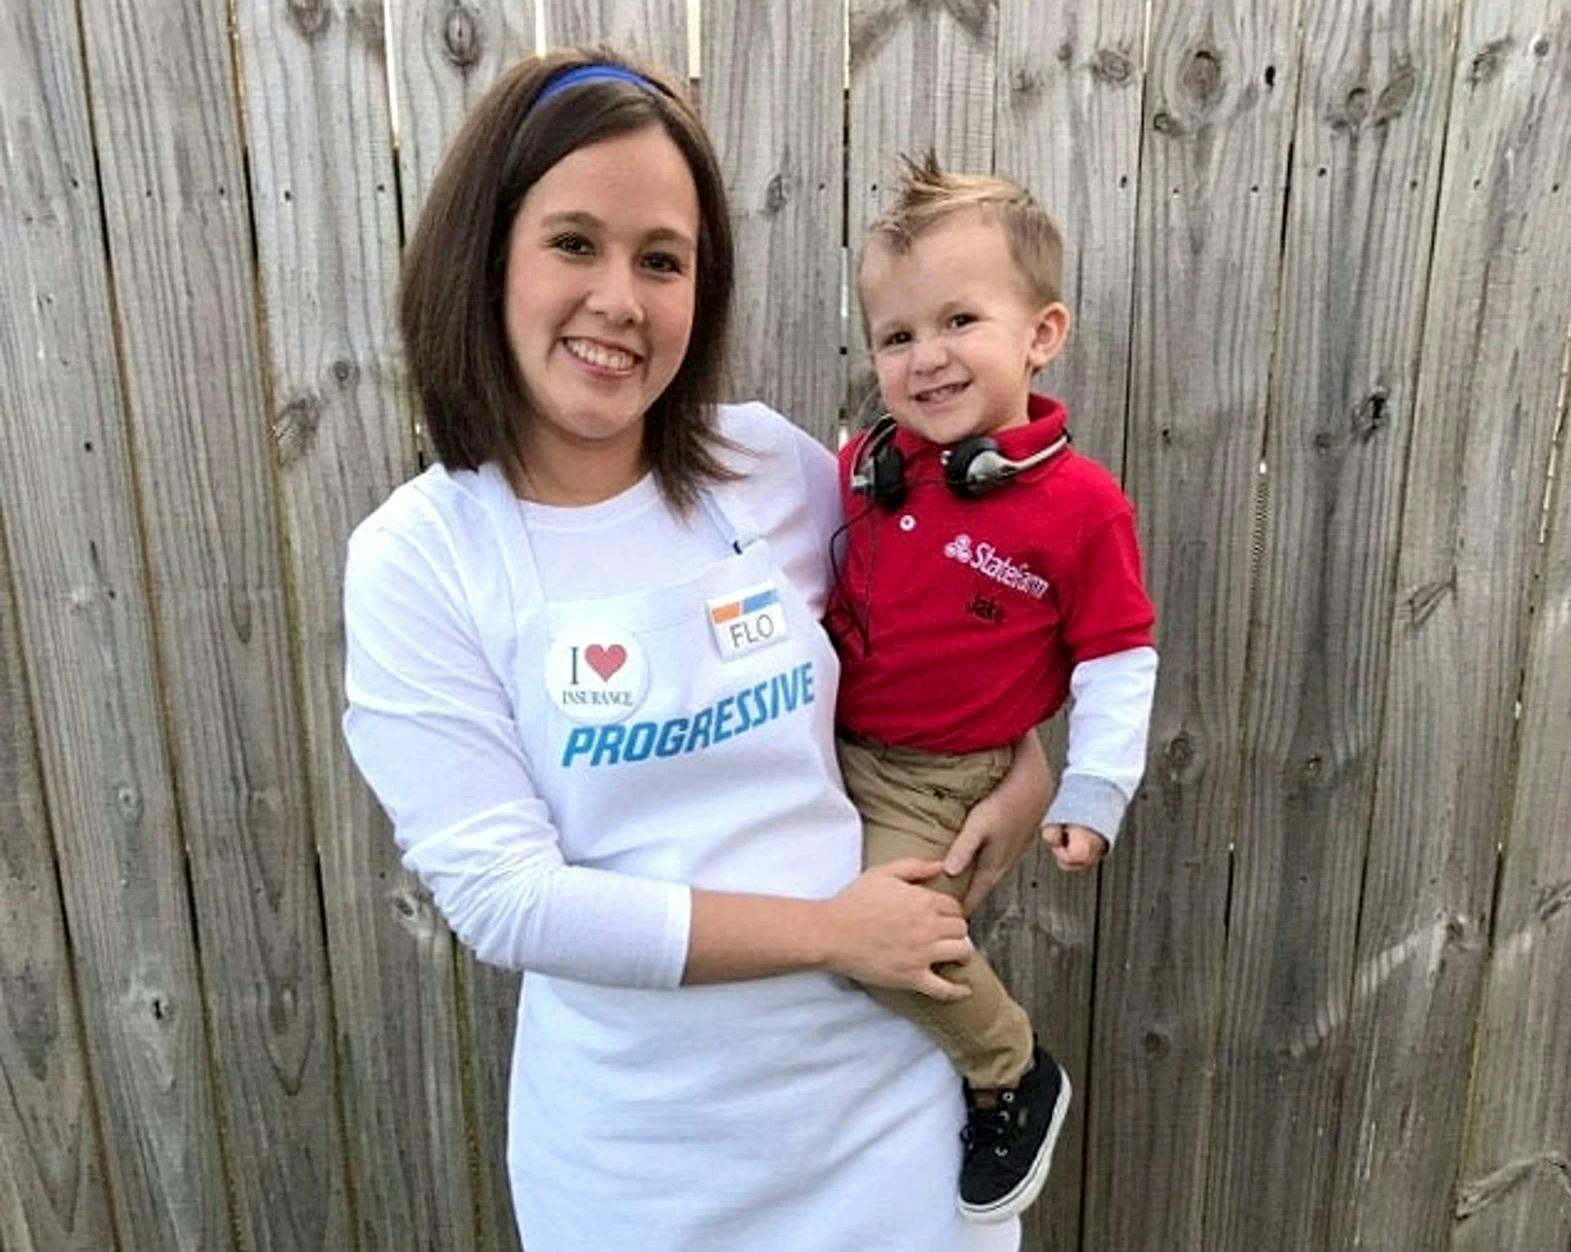 Mother and son dressed as Flo from Progressive and Jake from State Farm costumes